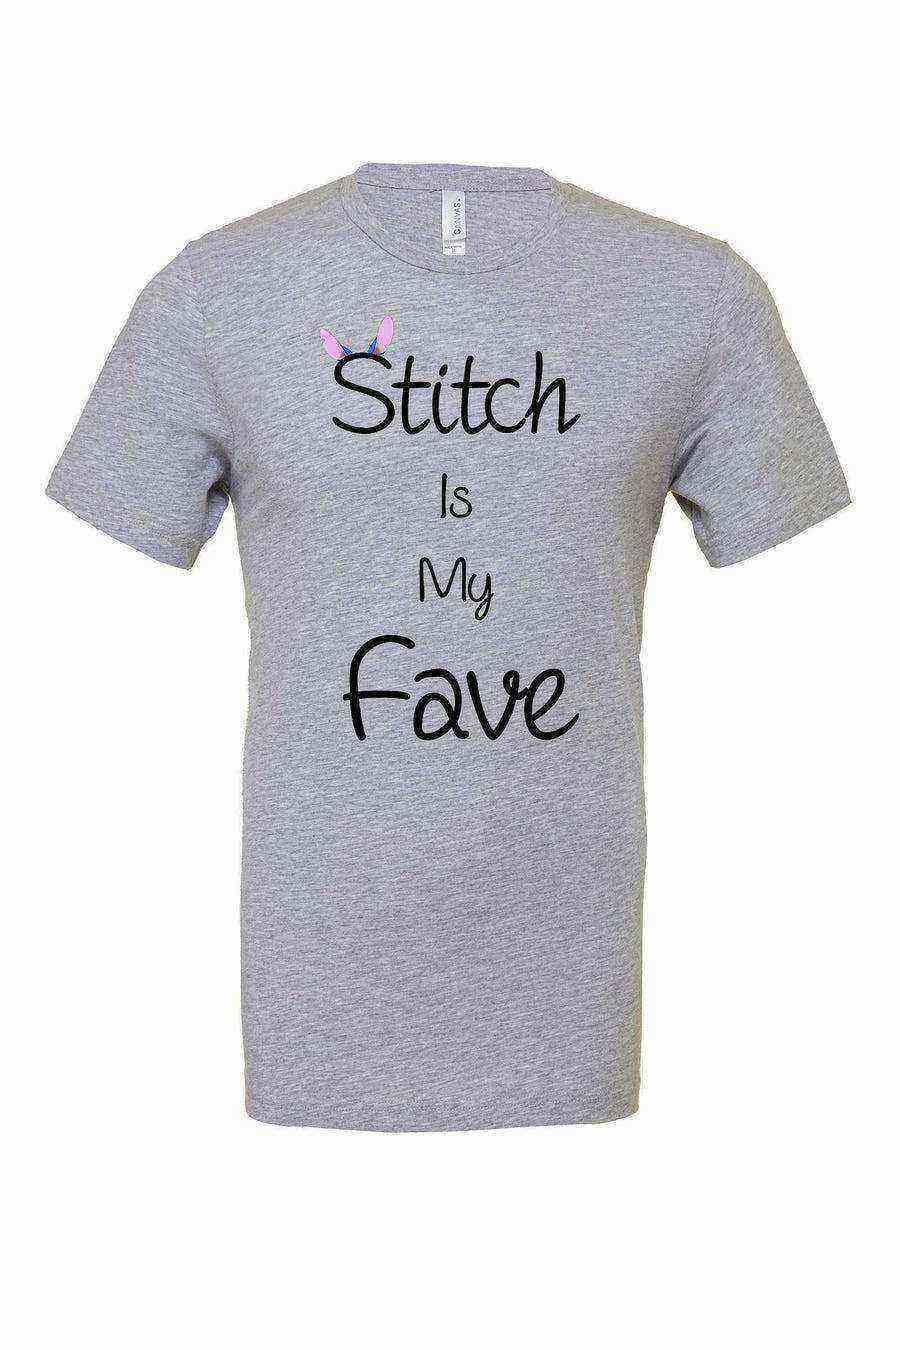 Toddler | Stitch is my Fave Shirt - Dylan's Tees